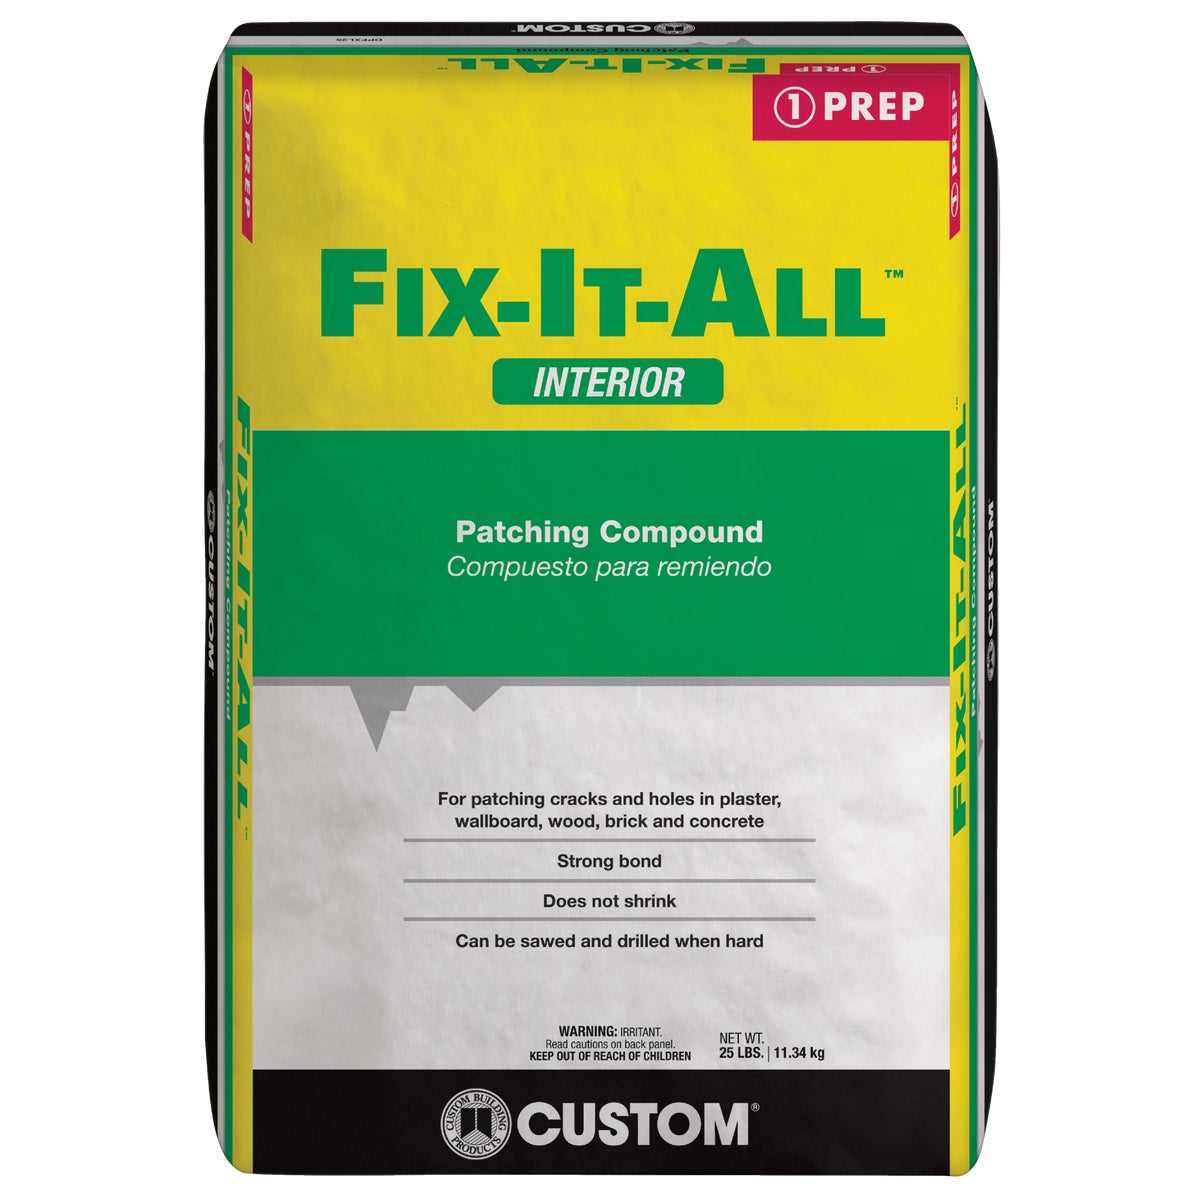 FIX-IT-ALL 25 Lb. Patching Compound